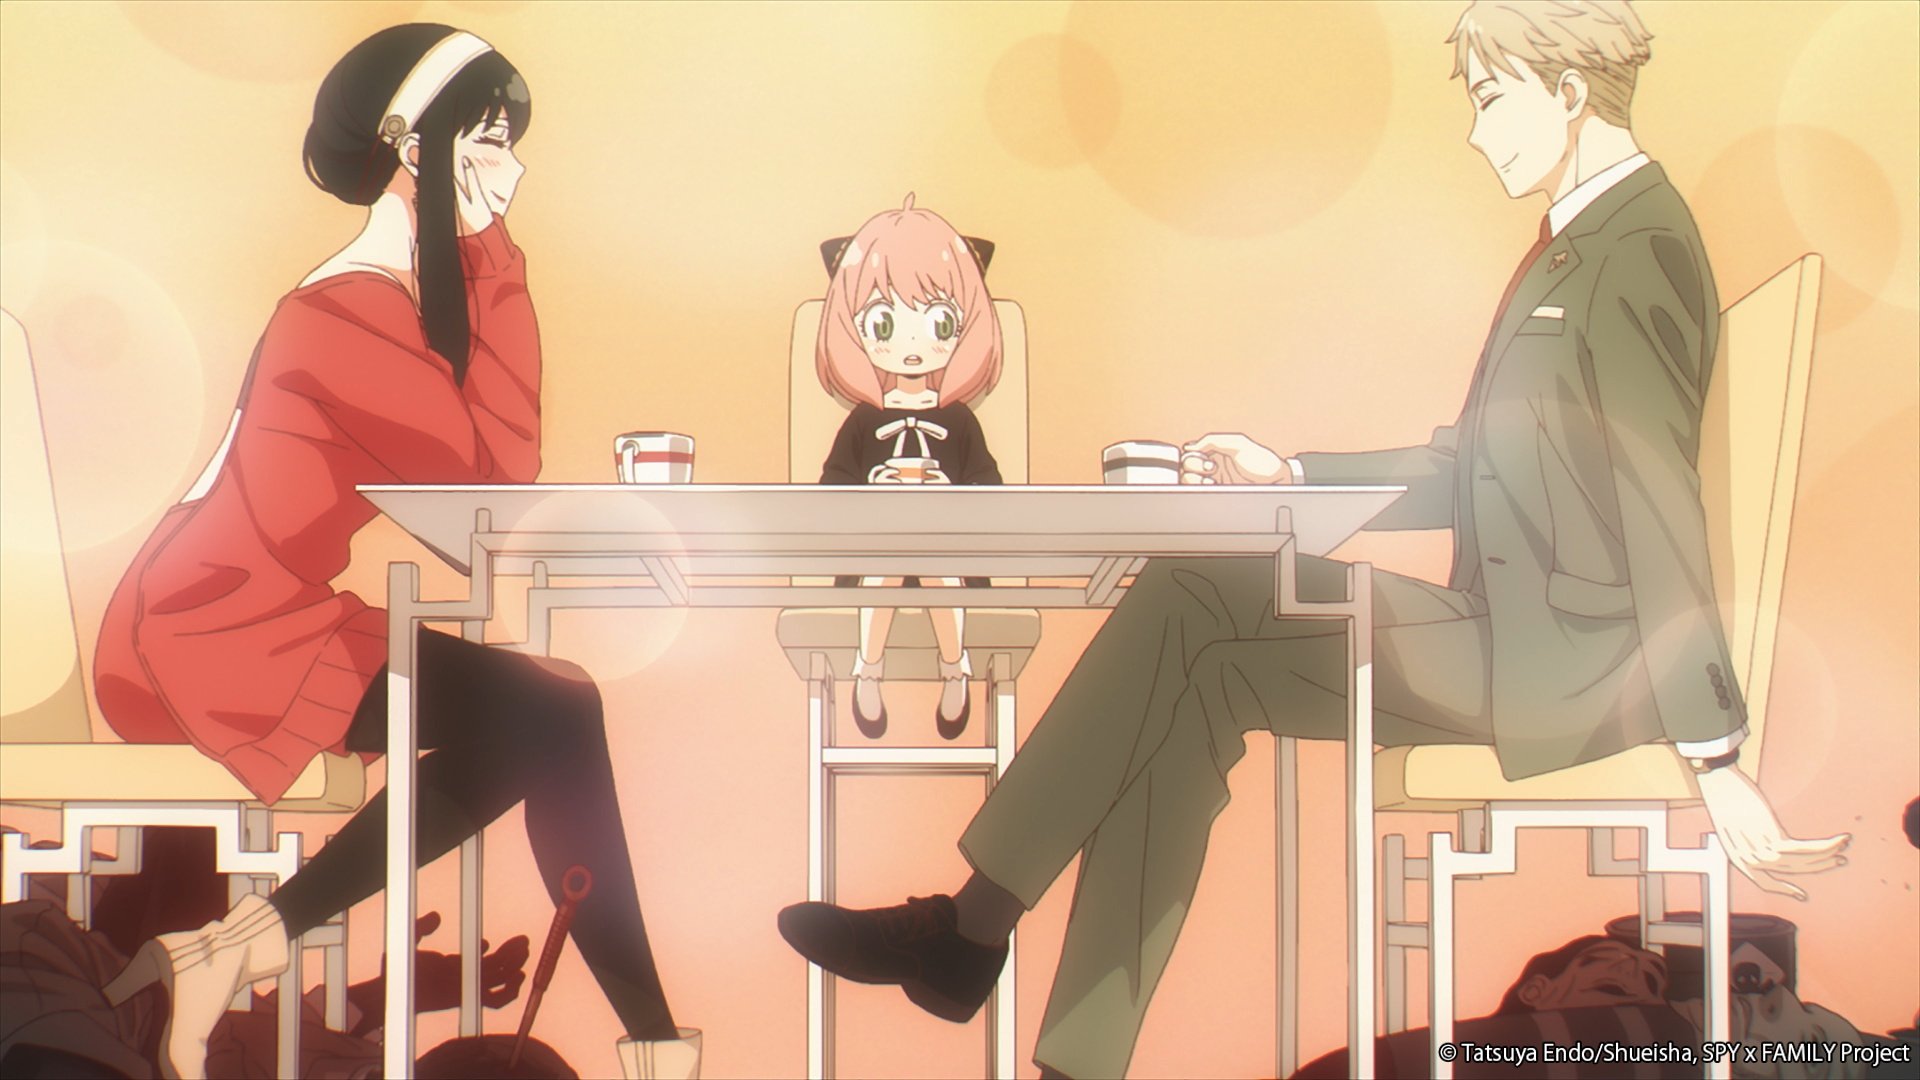 Yor, Anya, and Loid Forger drinking tea in 'Spy x Family.' Yor is leaning on the table, Anya is sitting between them, and Loid is smiling.